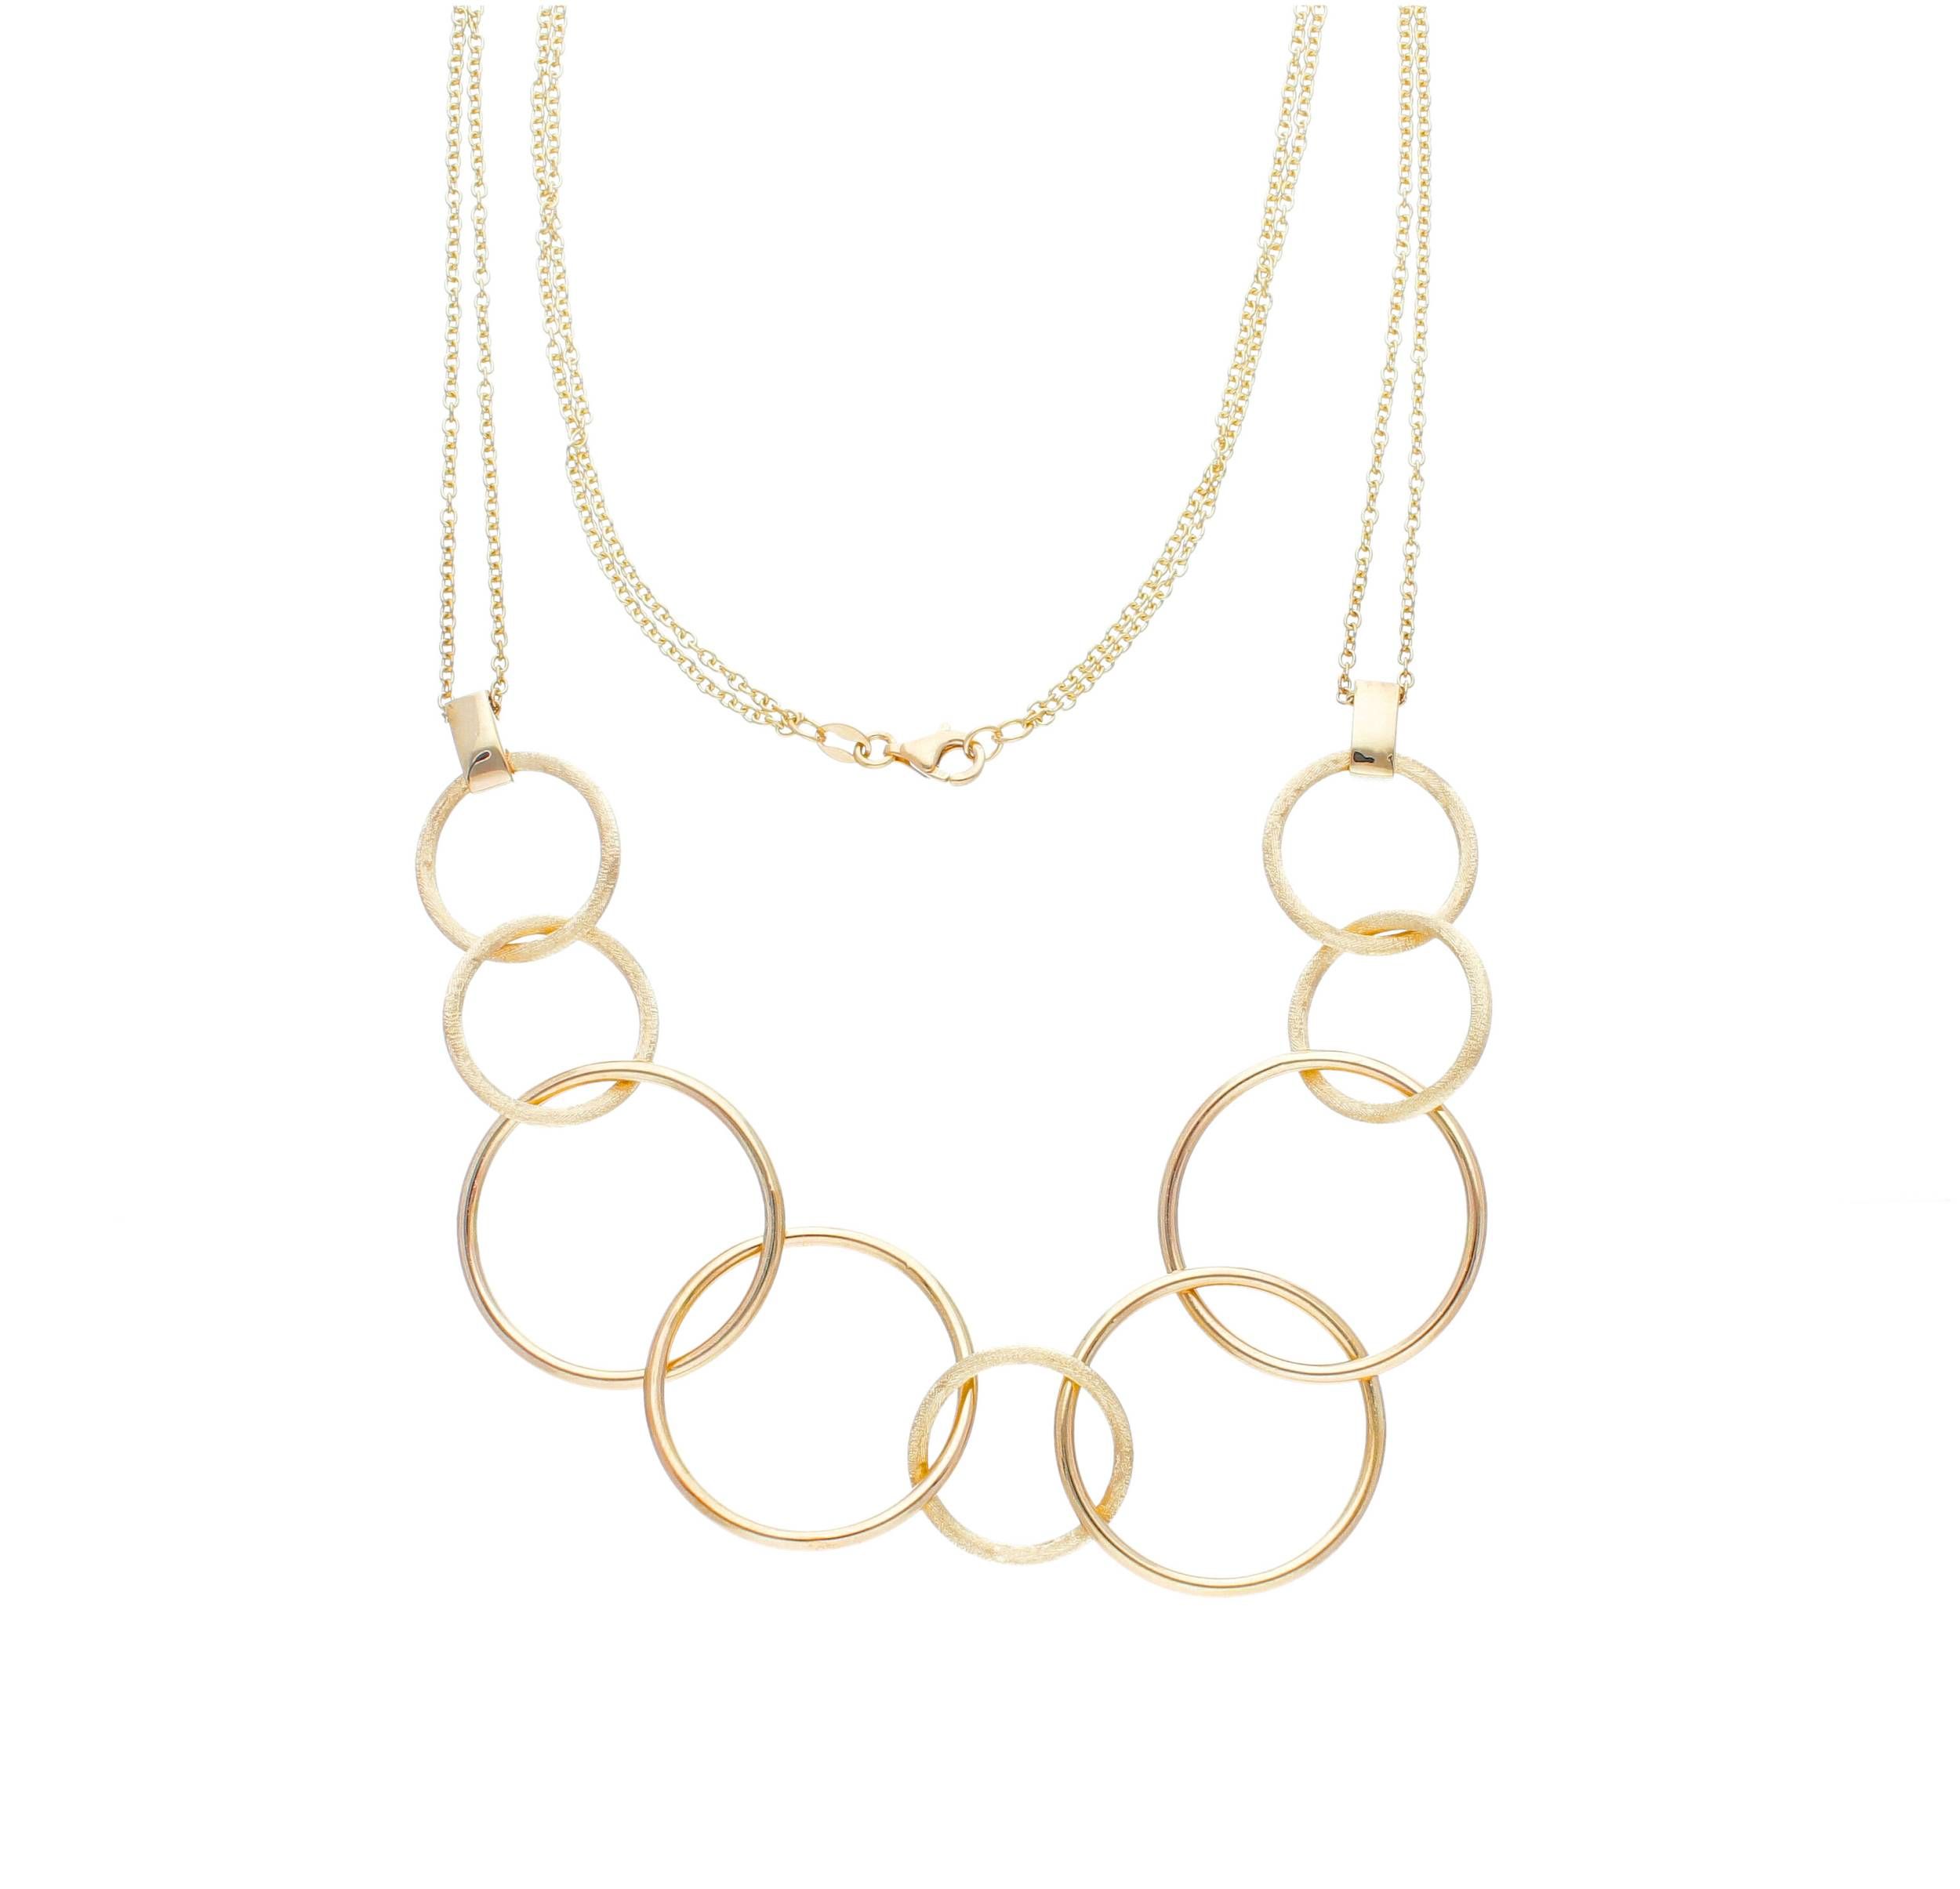 Golden necklace k14 with rings (code S242443)